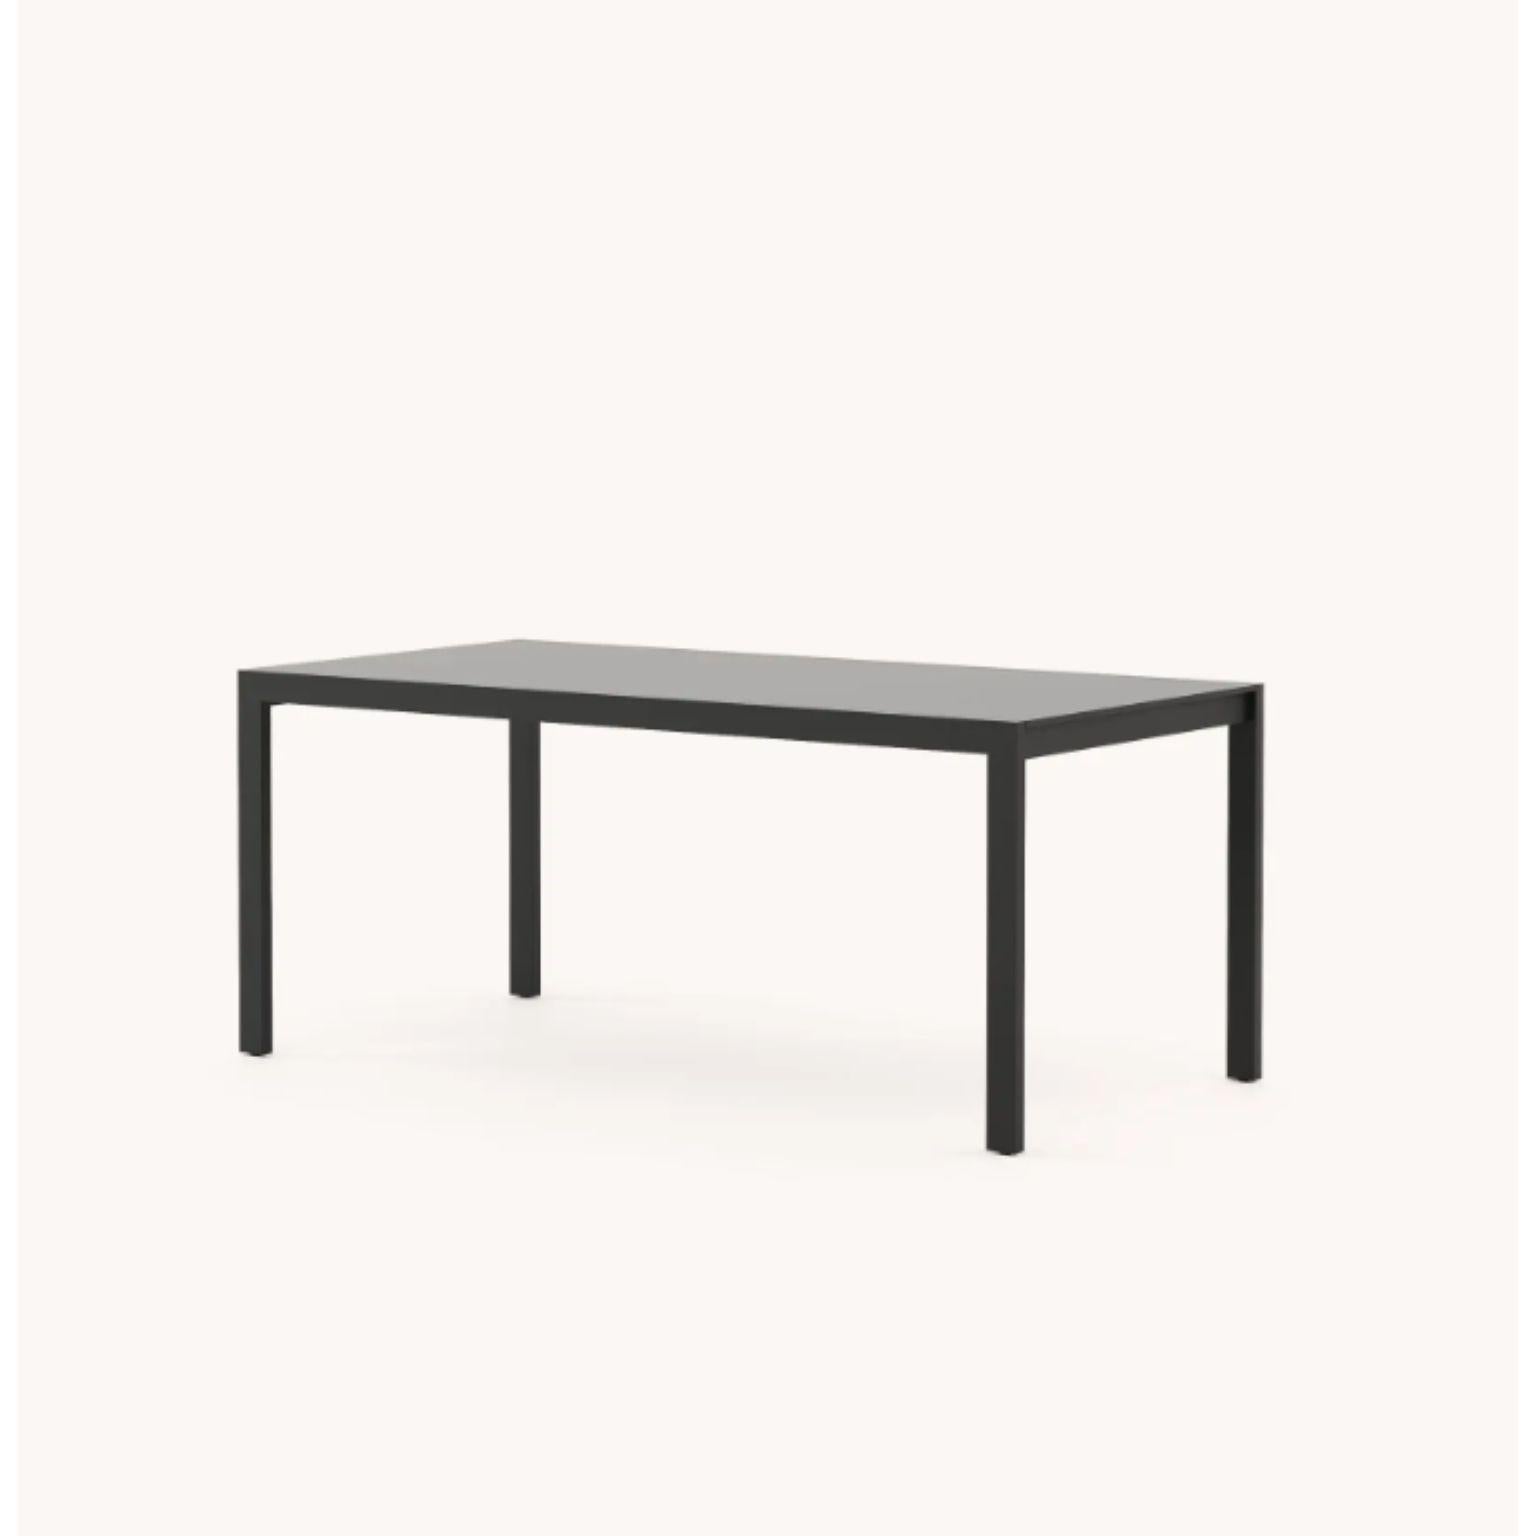 Large bondi dining table by Domkapa
Materials: black texturized steel, black lacquered.
Dimensions: W 220 x D 120 x H 78 cm.
Also available in different materials. 

Gather your friends and family and celebrate summer with comfort and style